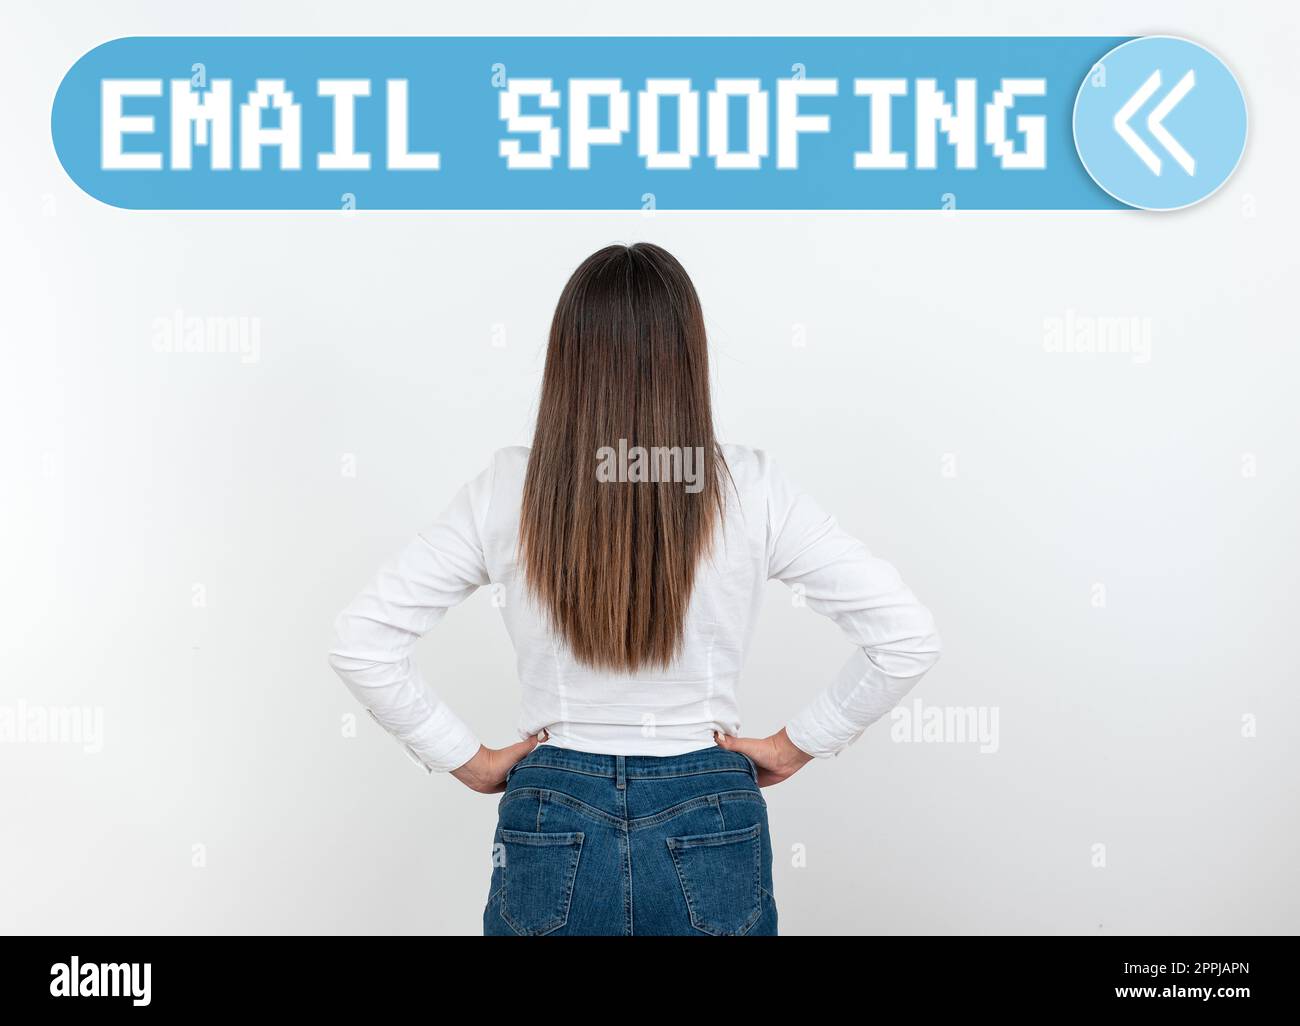 Handwriting text Email Spoofing. Business concept secure the access and content of an email account or service Stock Photo